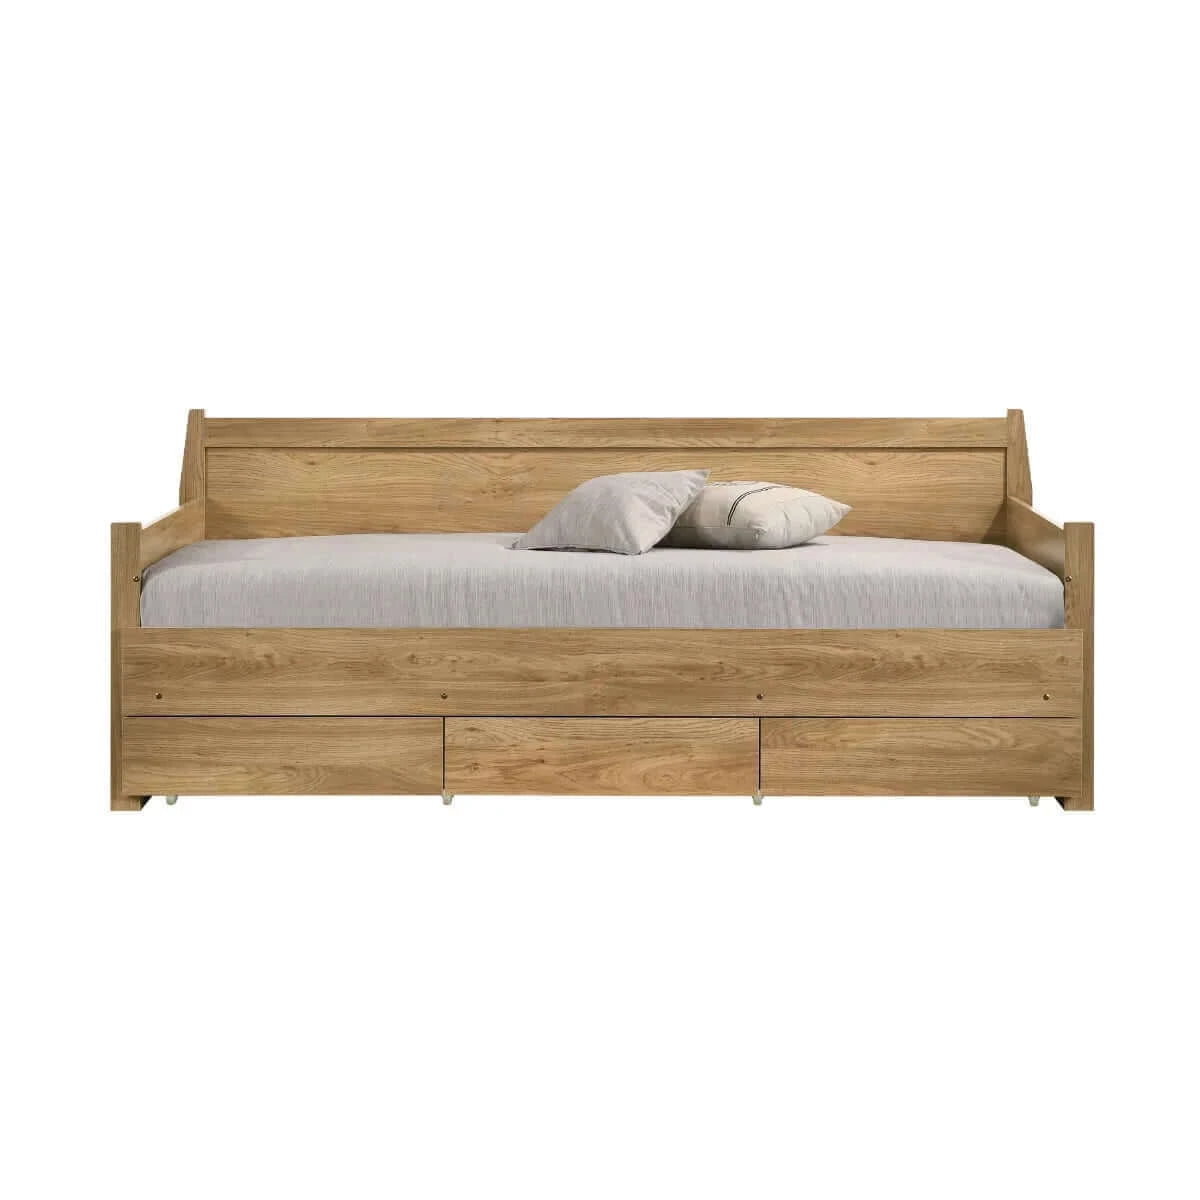 Mica Natural Wooden Day Bed with 3 Drawers Sofa Bed Frame-Upinteriors